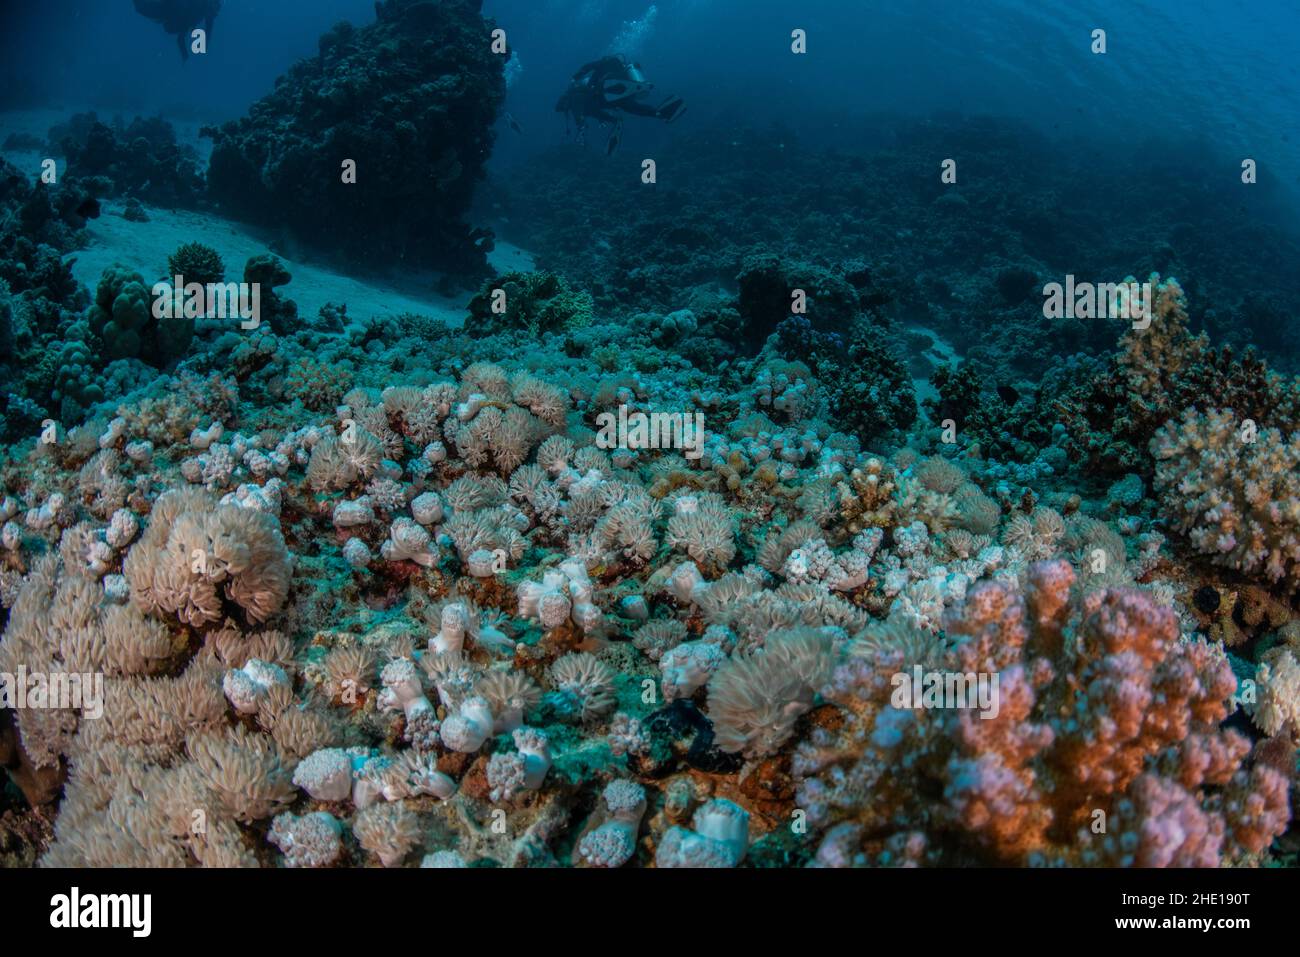 The sea floor in the red sea of Egypt with a coral reef made up largely of various soft corals like pulsating xenids. Stock Photo